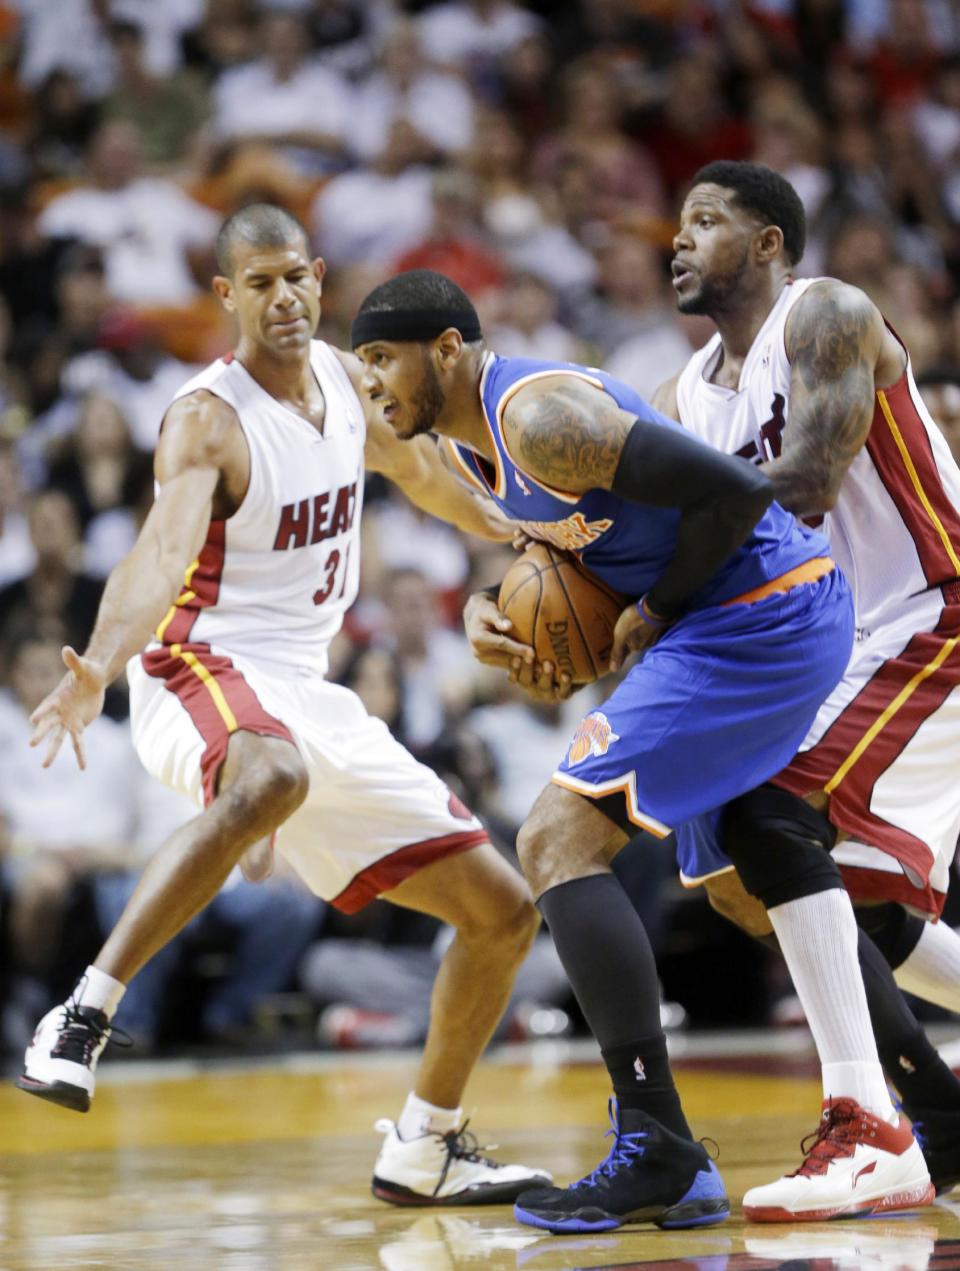 New York Knicks forward Carmelo Anthony, center, is fouled by Miami Heat forward Udonis Haslem, right, as forward Shane Battier, left, defends during the first half of an NBA basketball game, Sunday, April 6, 2014, in Miami. (AP Photo/Wilfredo Lee)